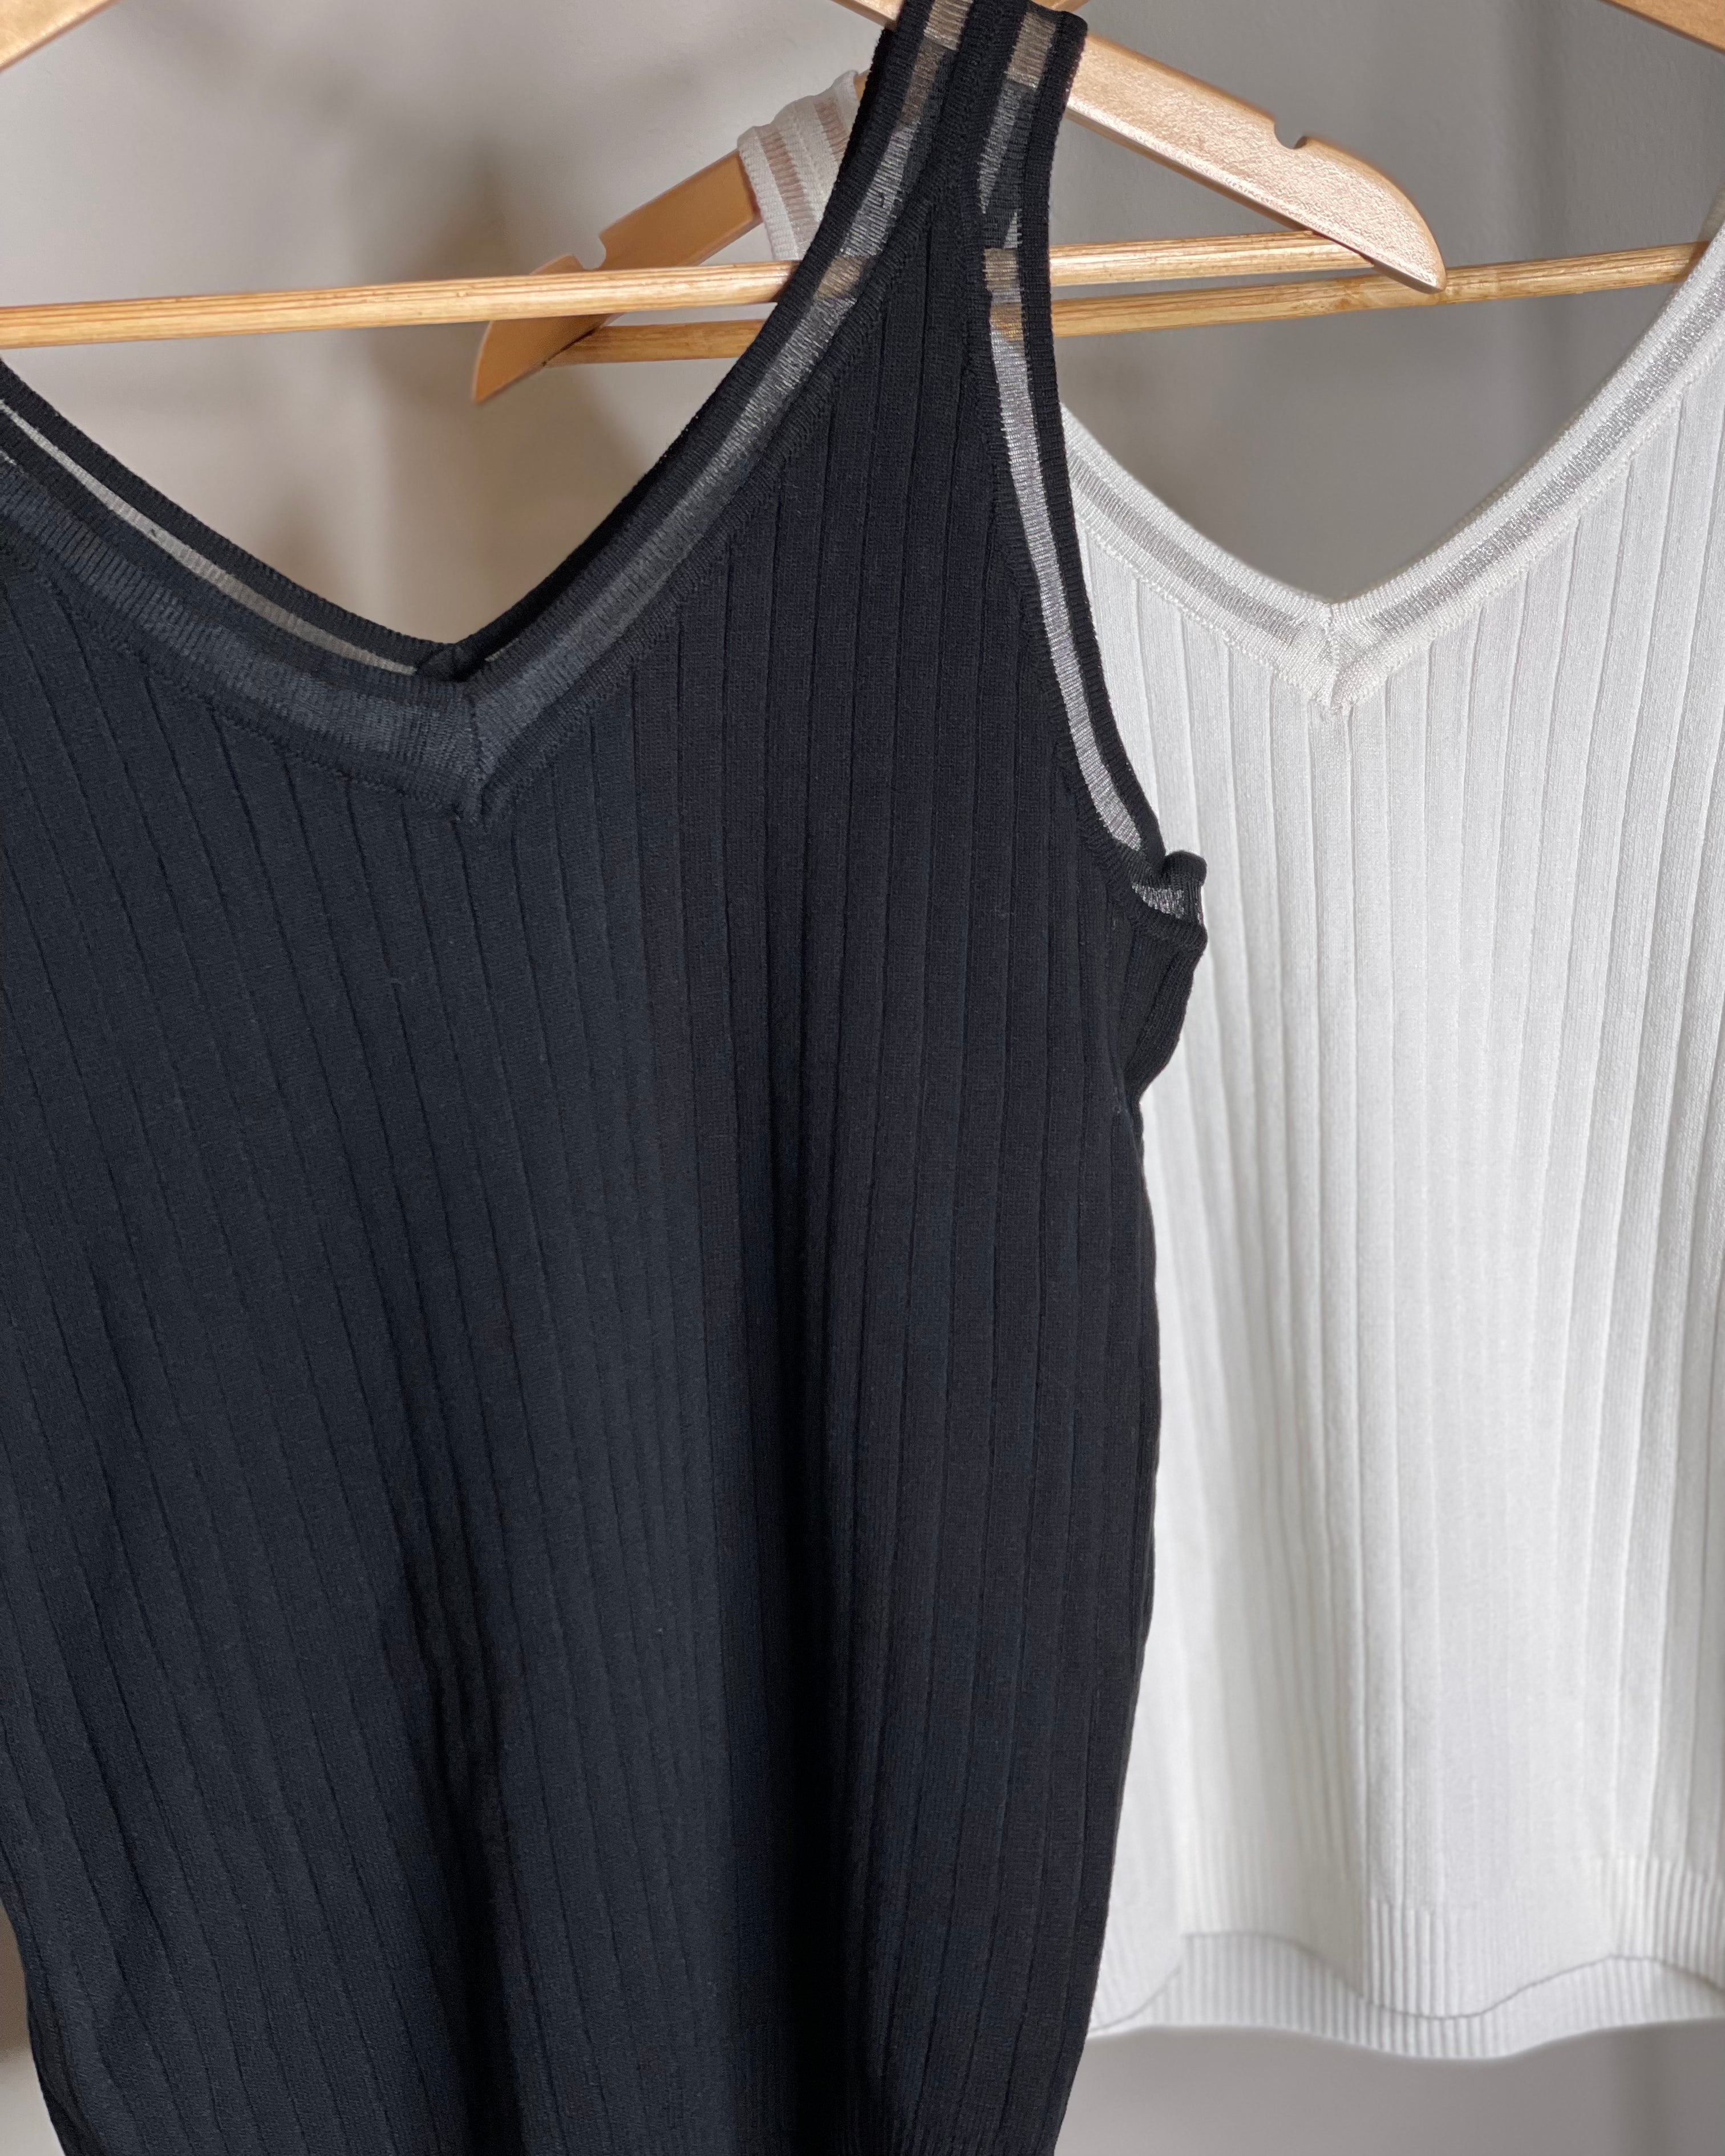 Sweater Tank in Black or Ivory.